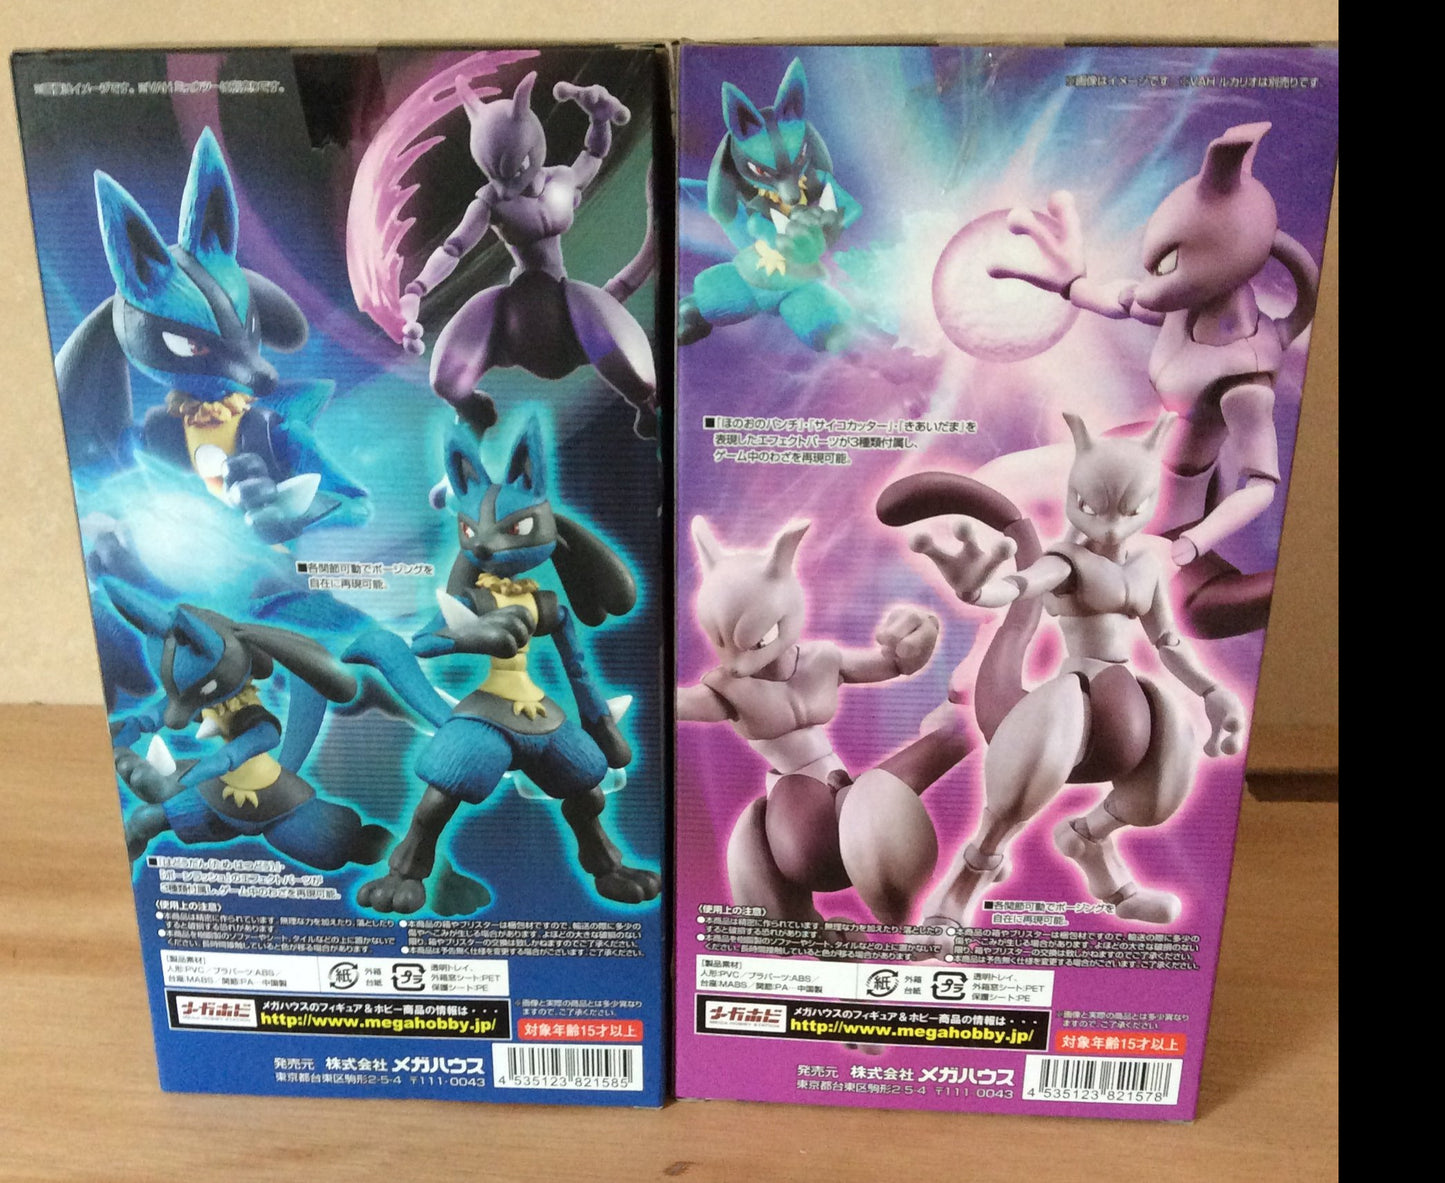 Variable Action Heroes Pokemon BUNDLE/LOT Lucario & Mewtwo